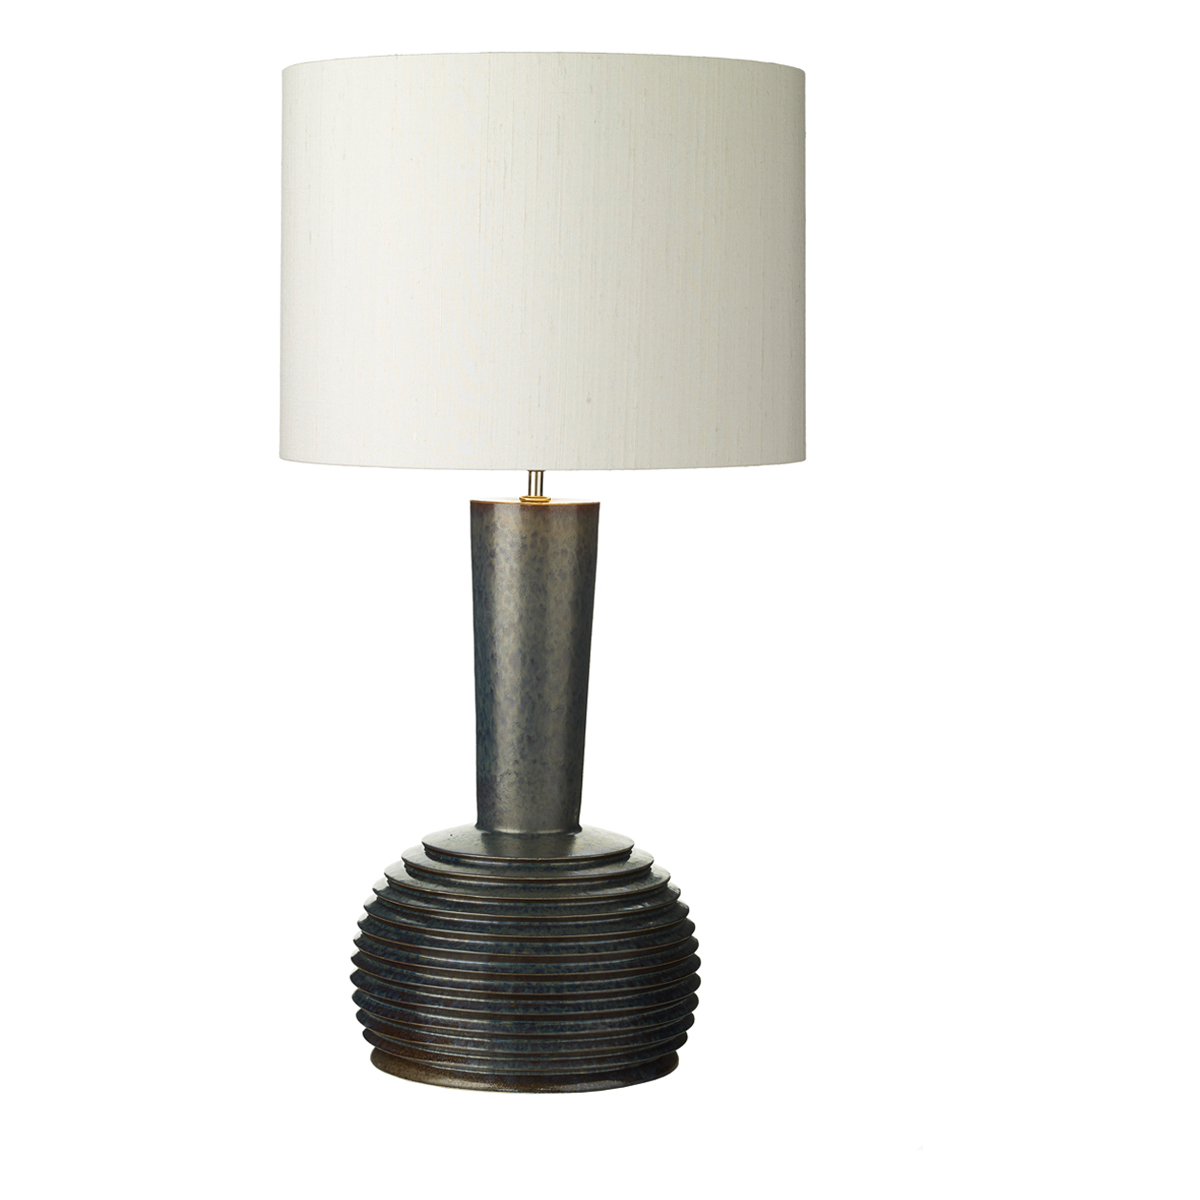 Liquid Table Lamp Ribbed Black Oil, Large Table Lamp Base Only